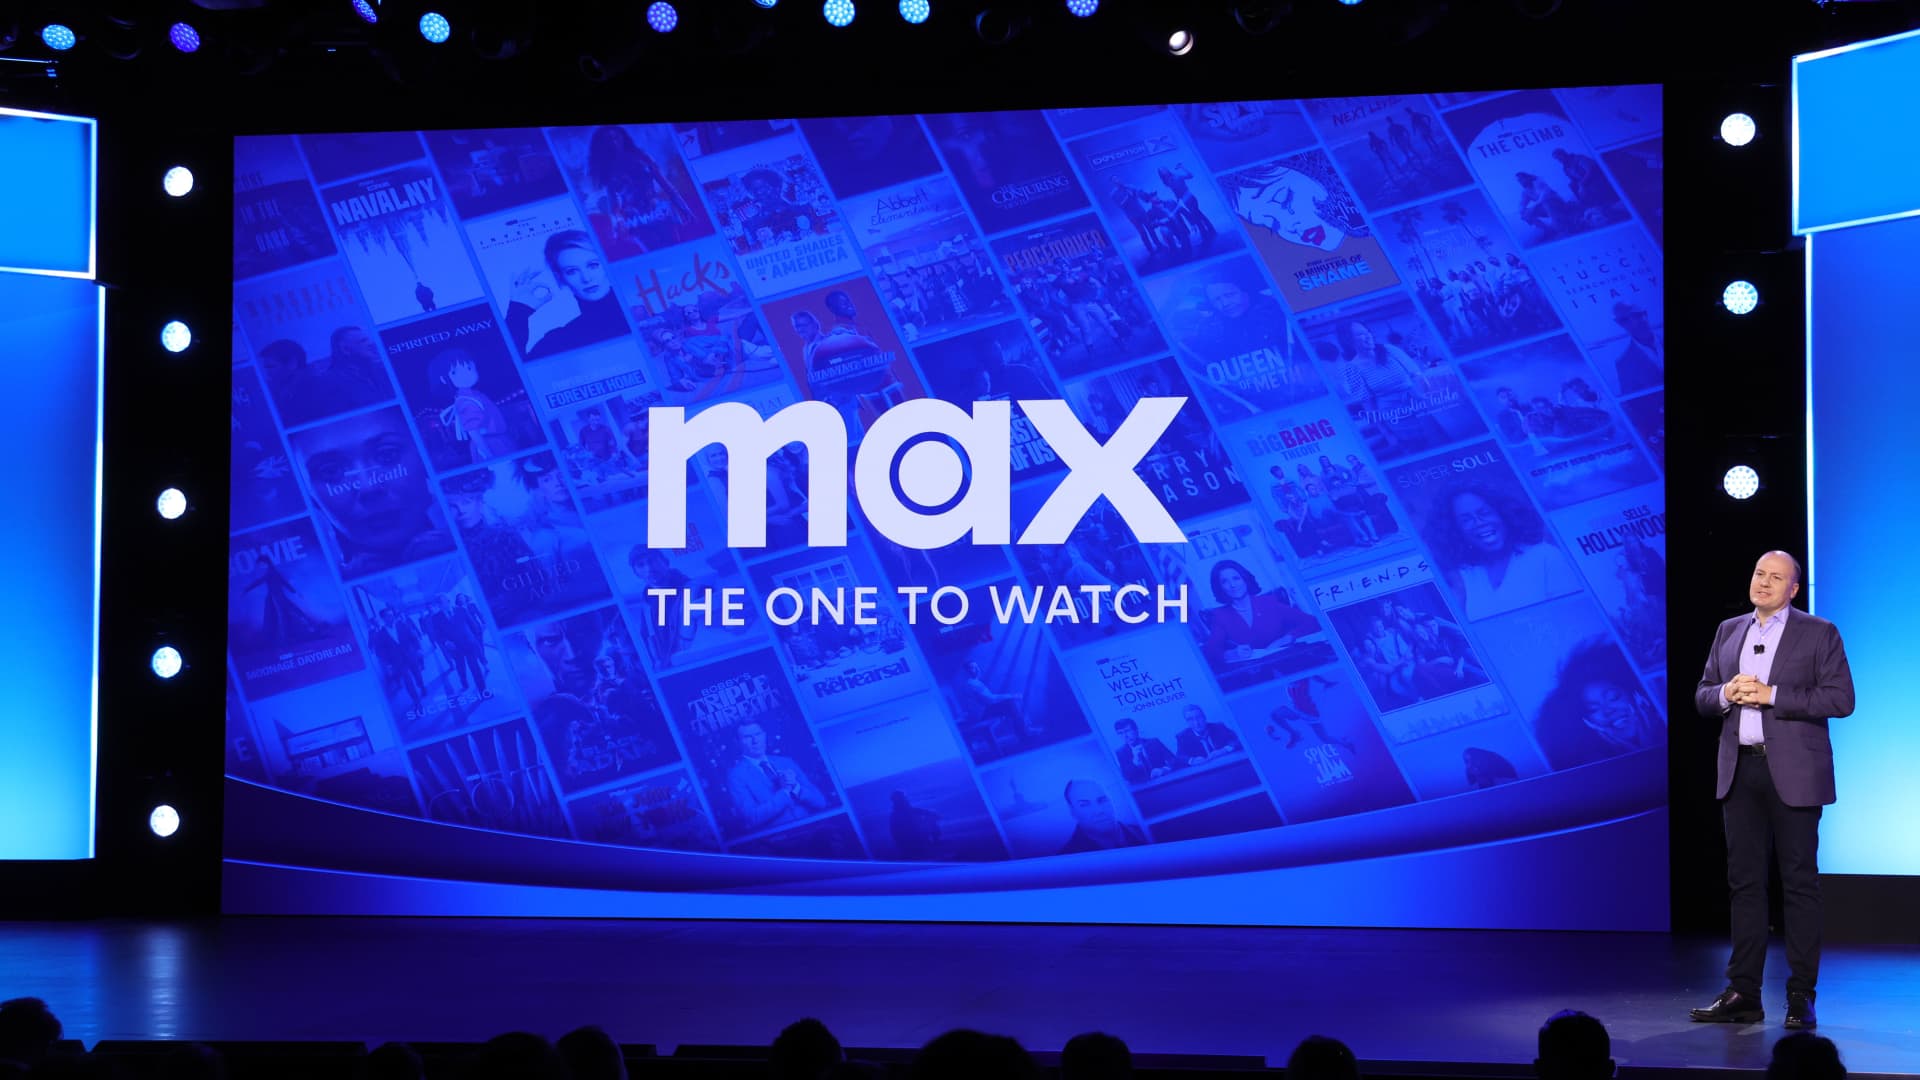 HBO Max is just ‘Max’ now—here are the 4 things to know about the new streaming service